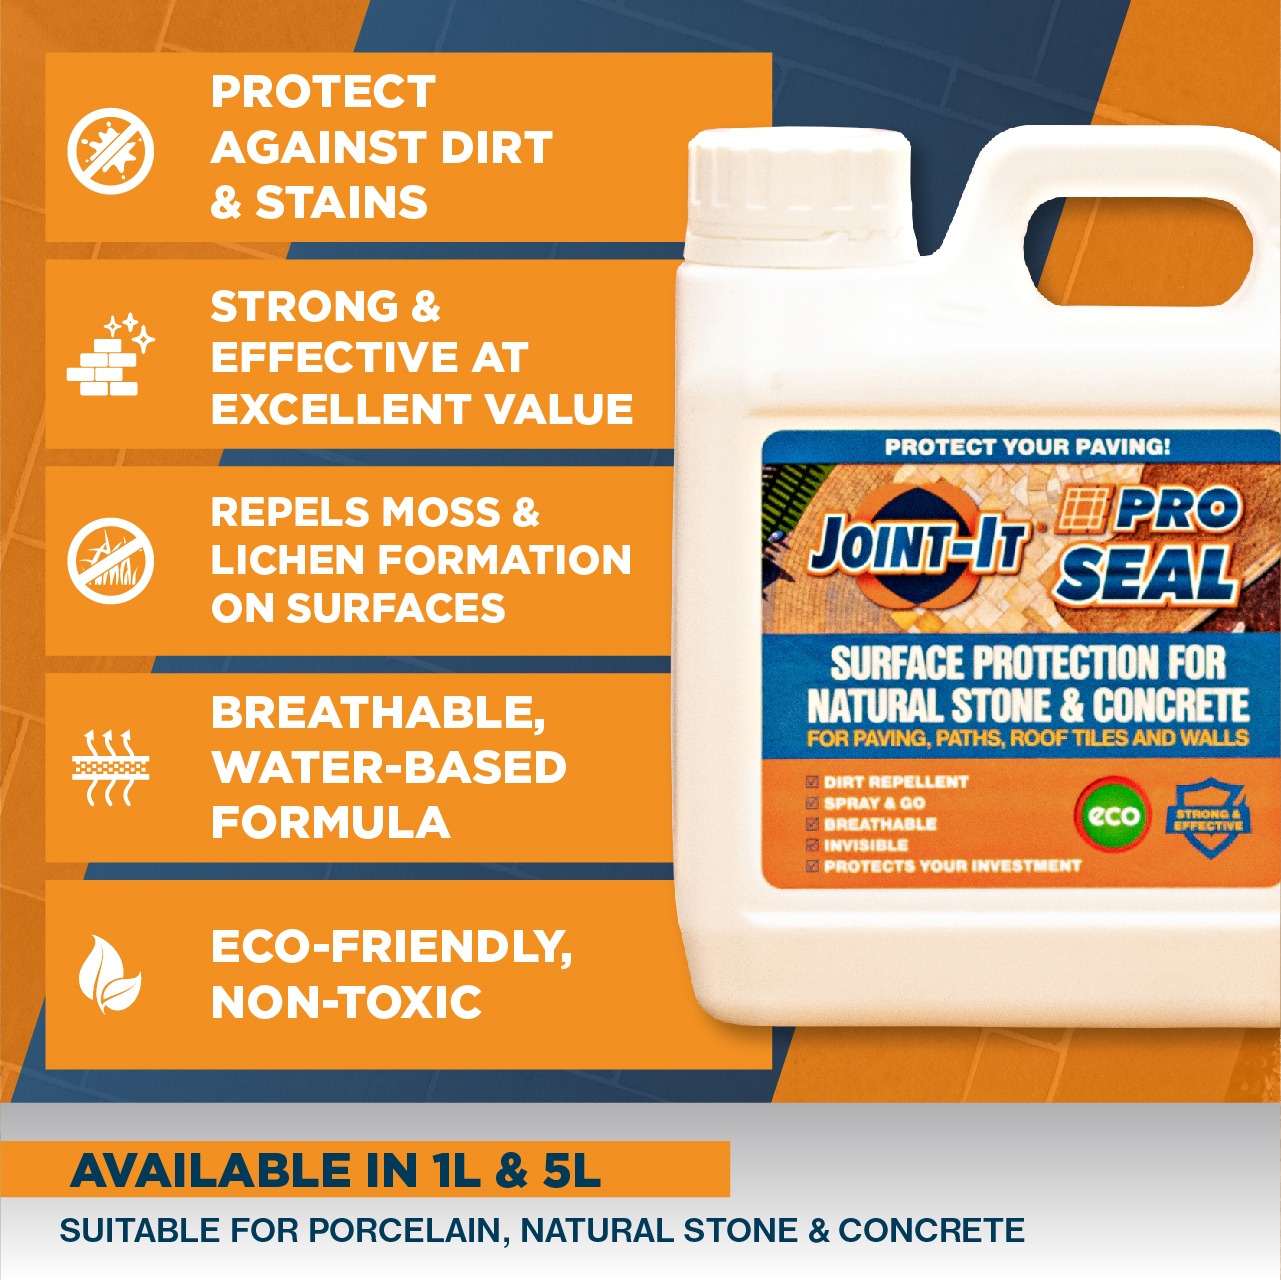 Joint-It Pro Seal